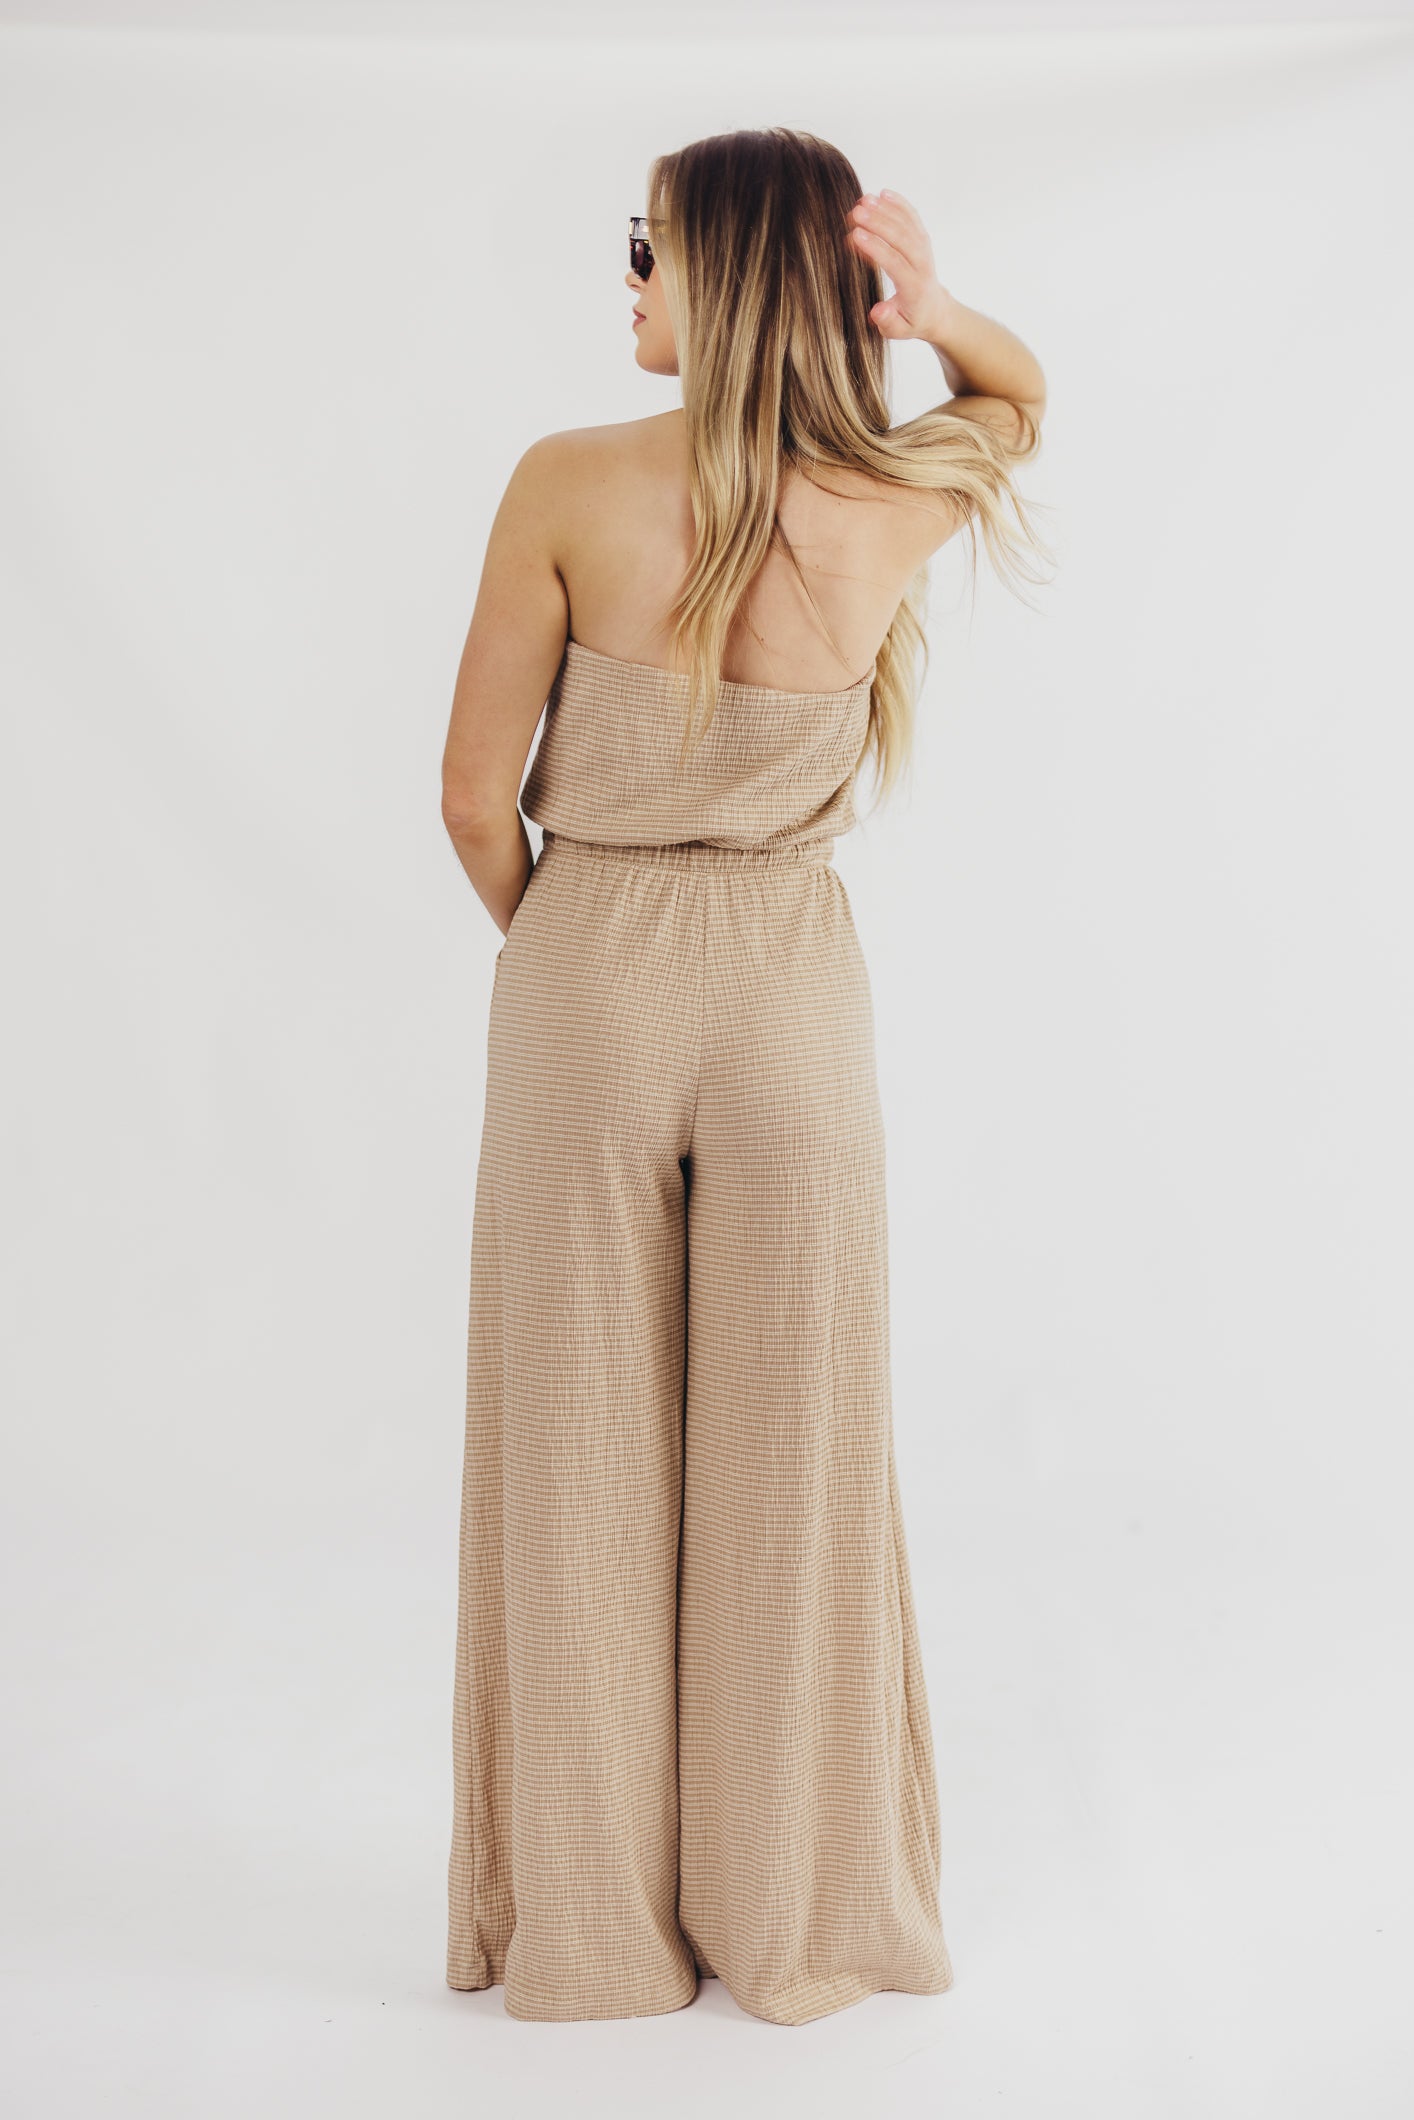 Etienne Strapless Knit Jumpsuit in Taupe/Ivory